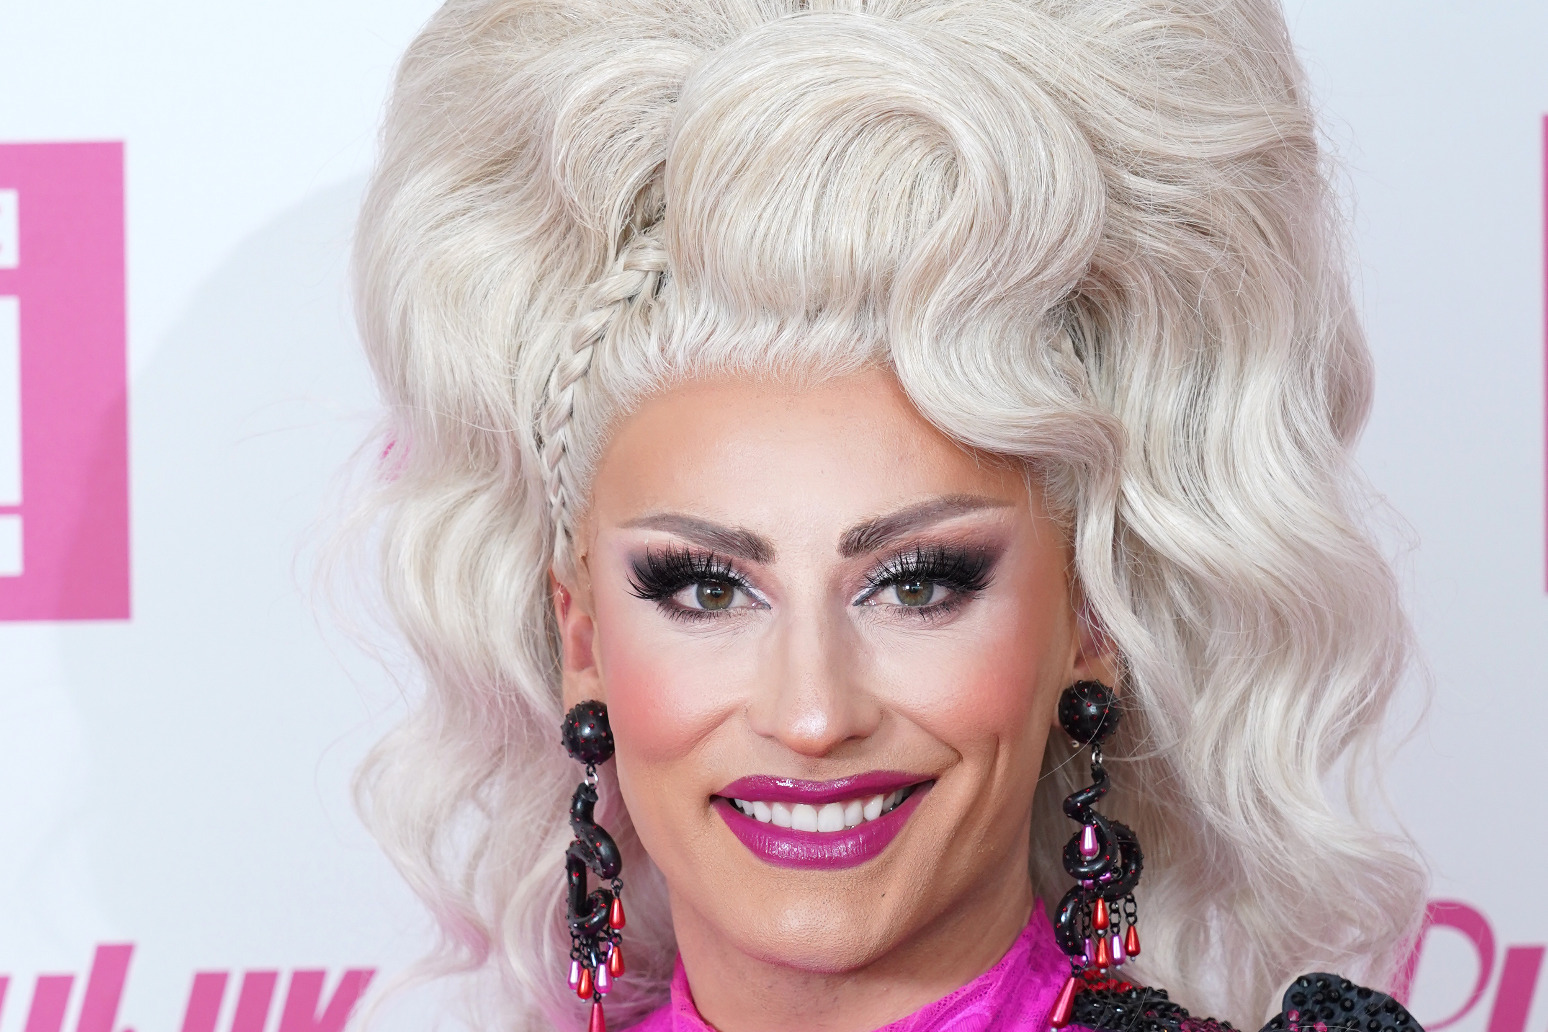 Drag Race’s Ella Vaday expects ‘magical journey’ on 100km charity trek 